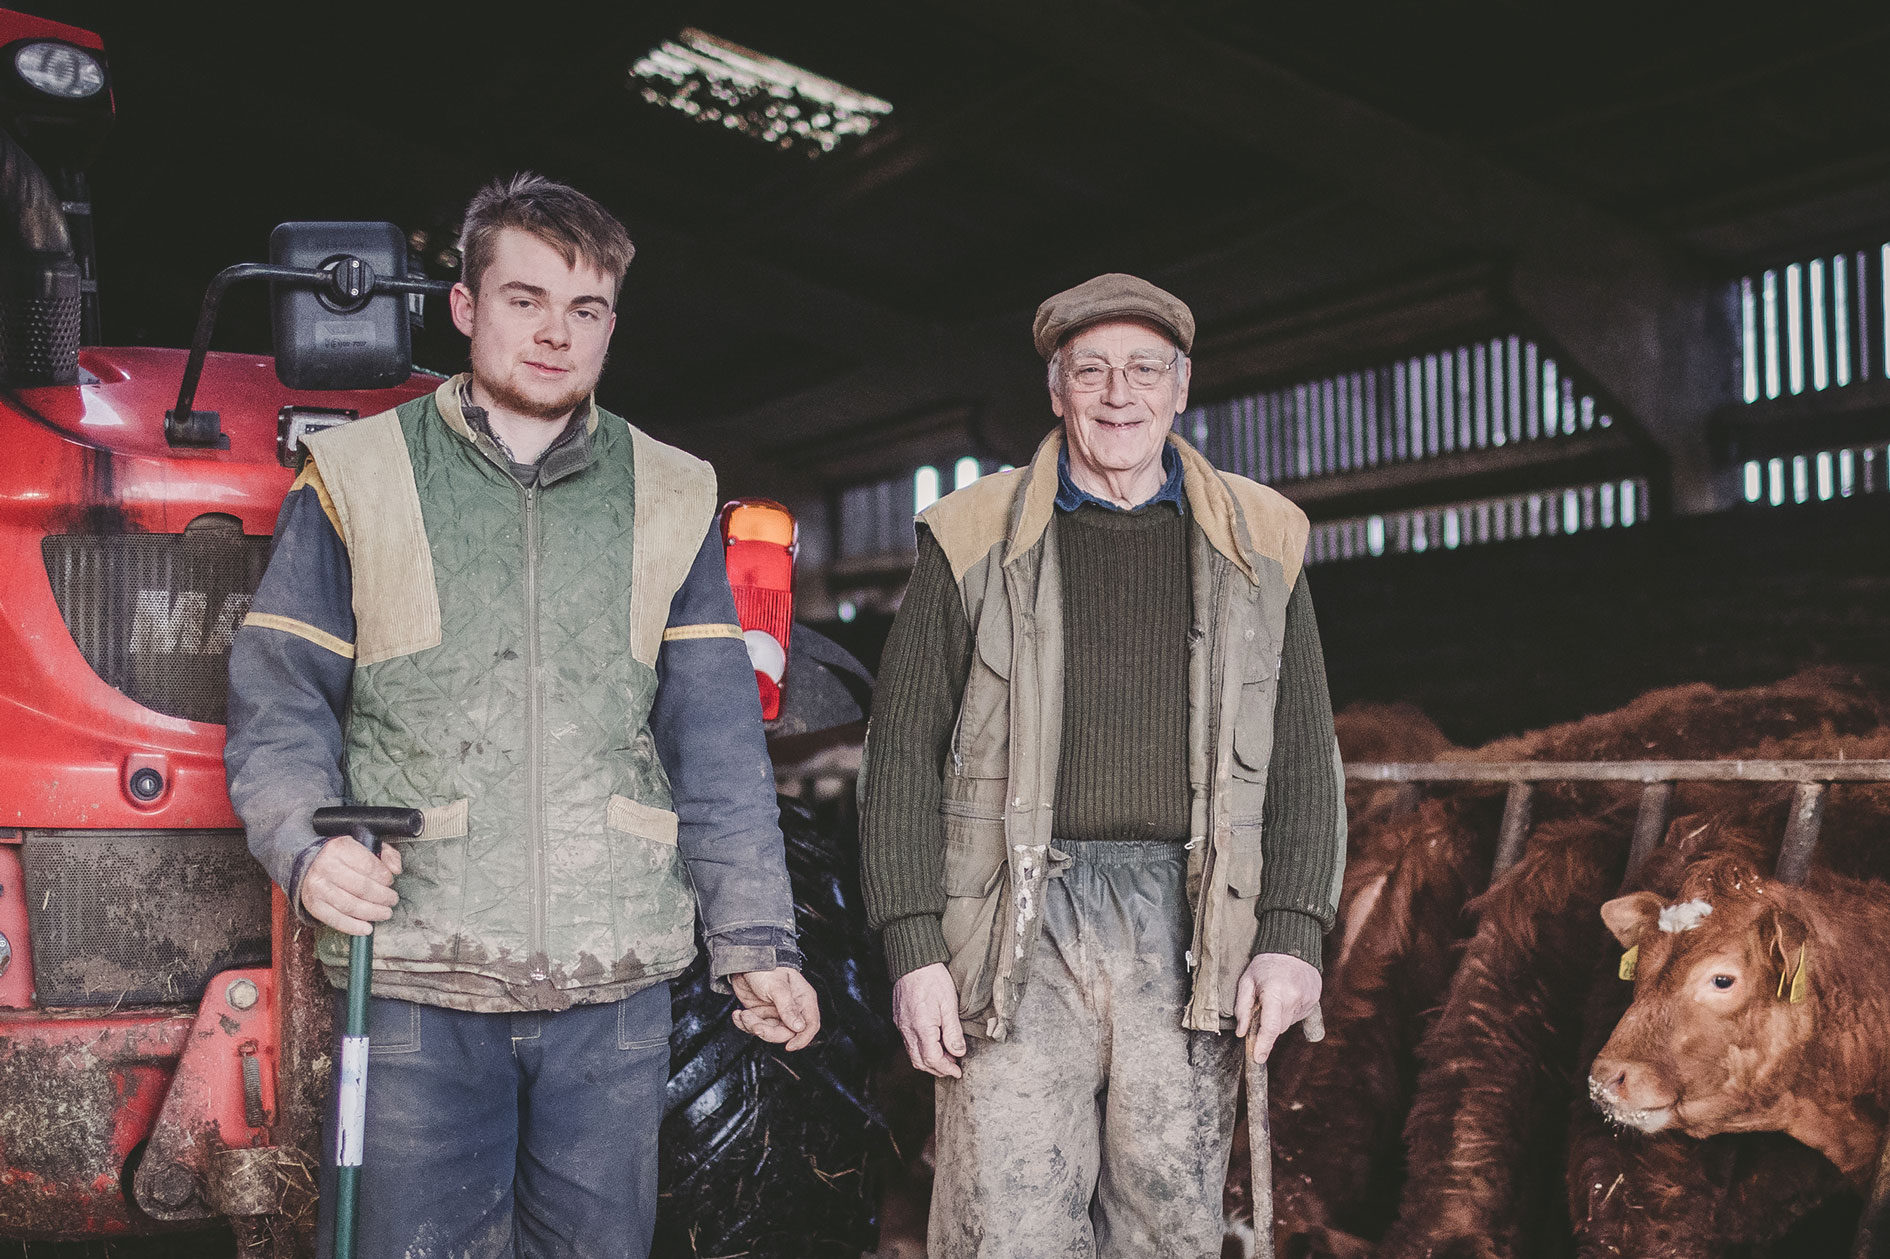 Michael Doull, Farming Apprentice with Thomas Sinclair (Messrs Sinclair, Reaster Farm, Lyth)Photography by Colin Campbell Photography and Design